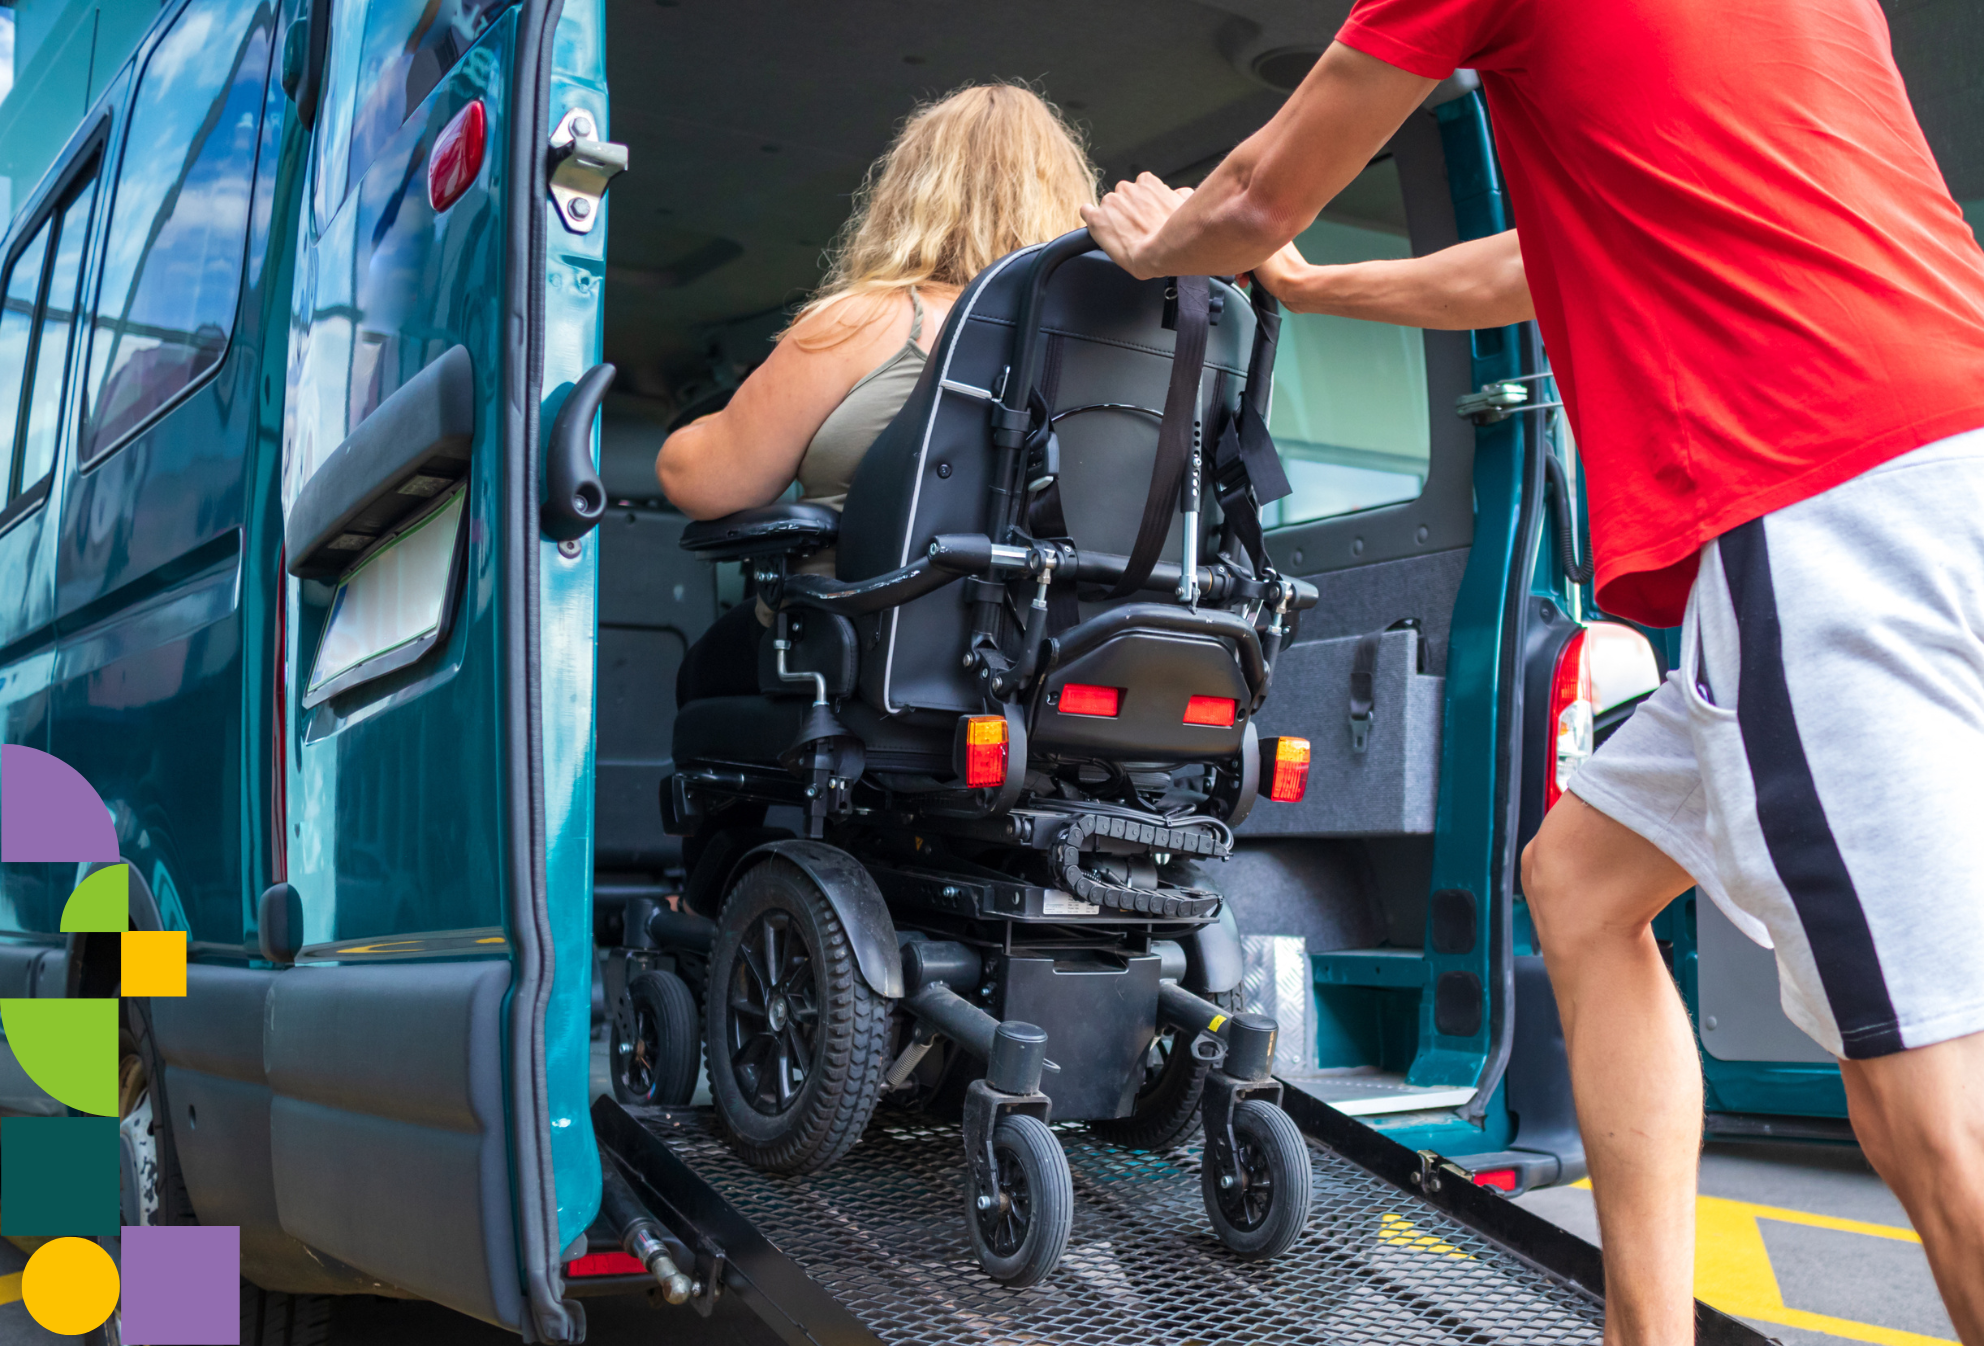 Accessible Transport: Everyone deserves to travel